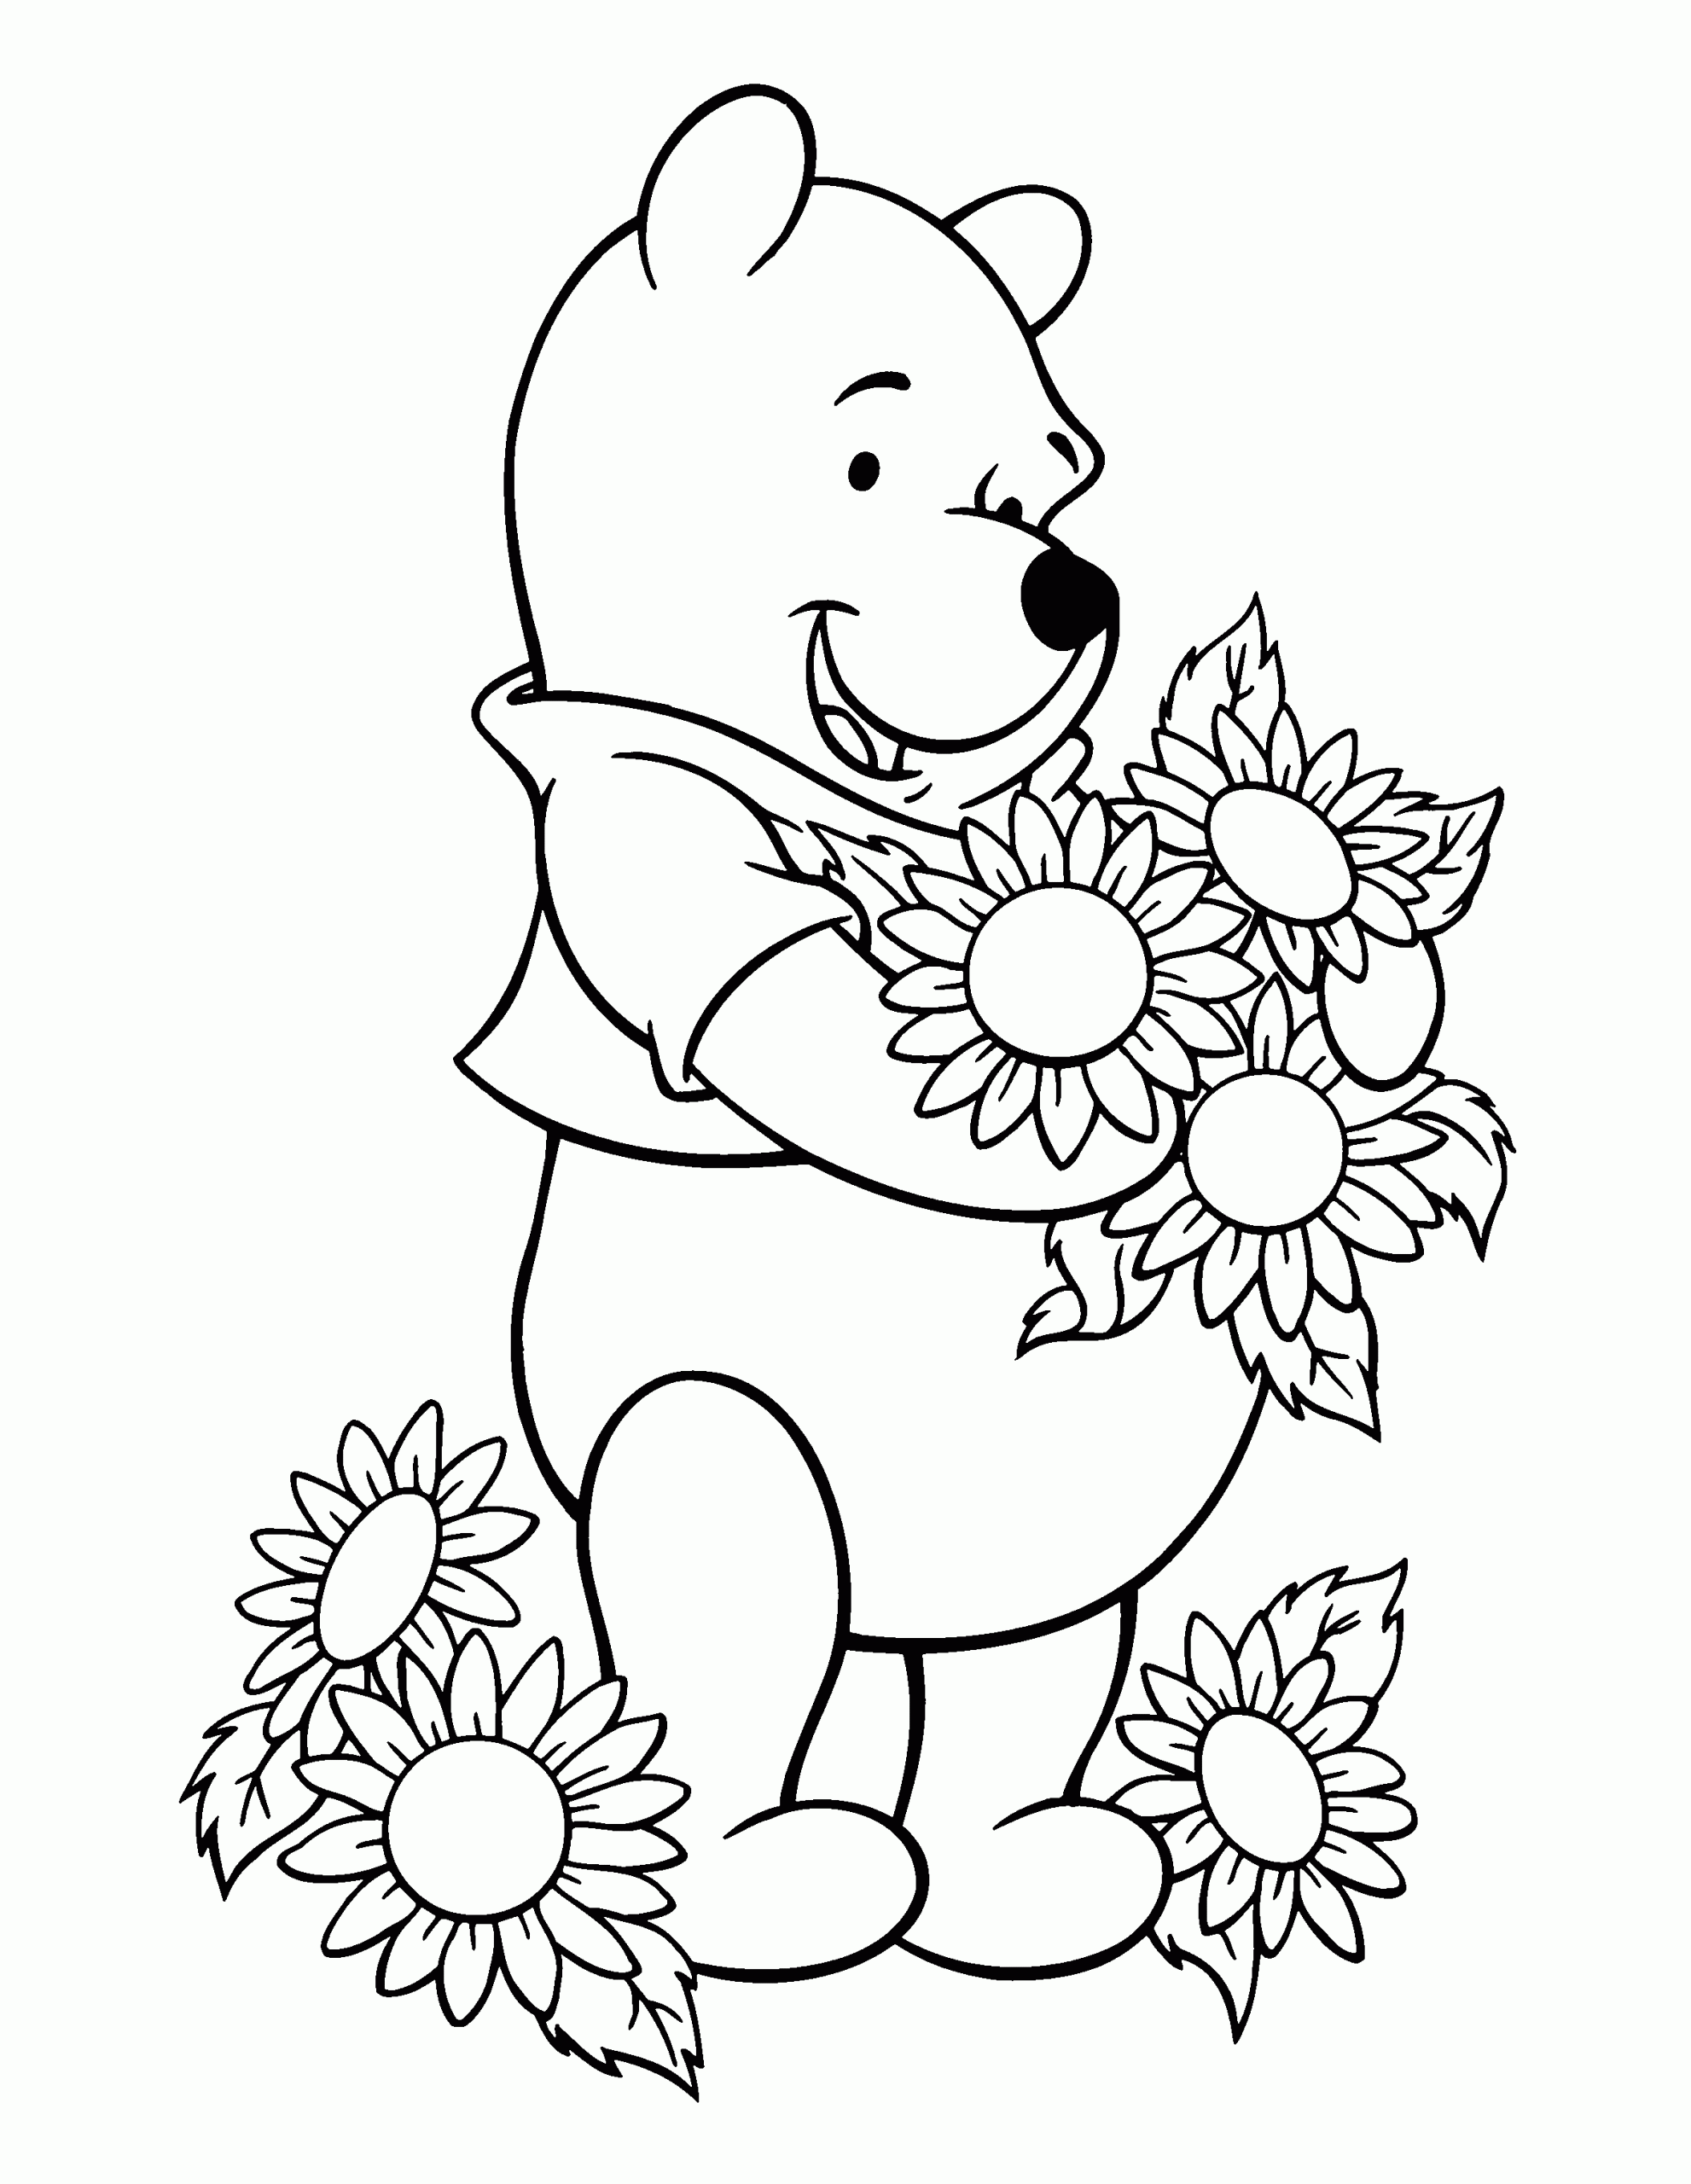 Baby Winnie The Pooh With flower Coloring Page